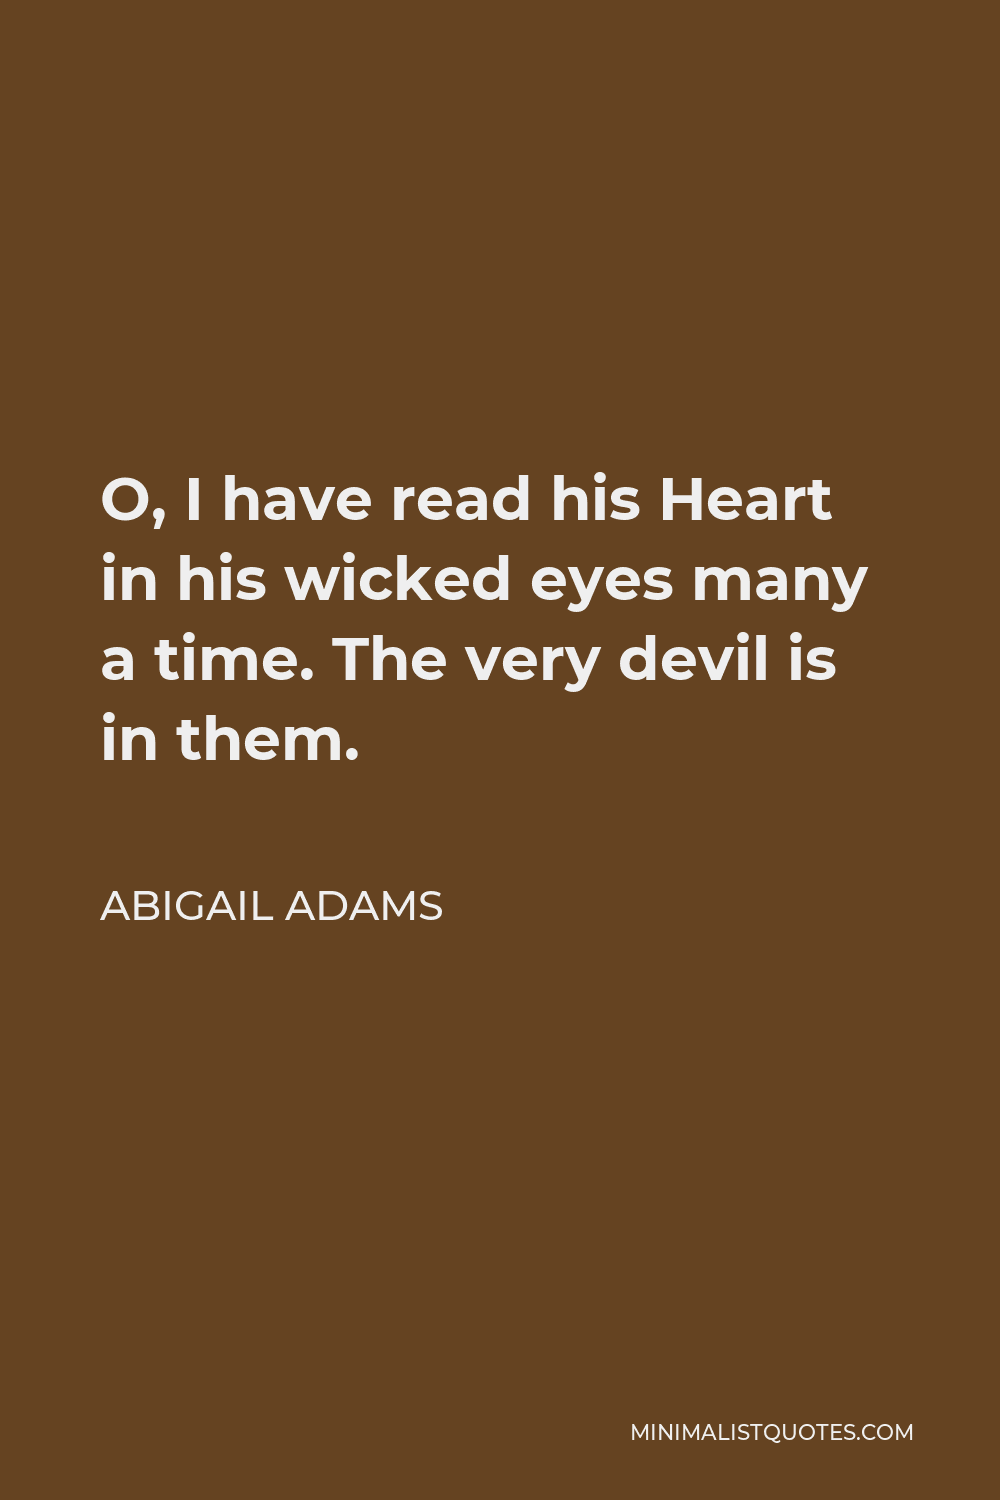 Abigail Adams Quote - O, I have read his Heart in his wicked eyes many a time. The very devil is in them.